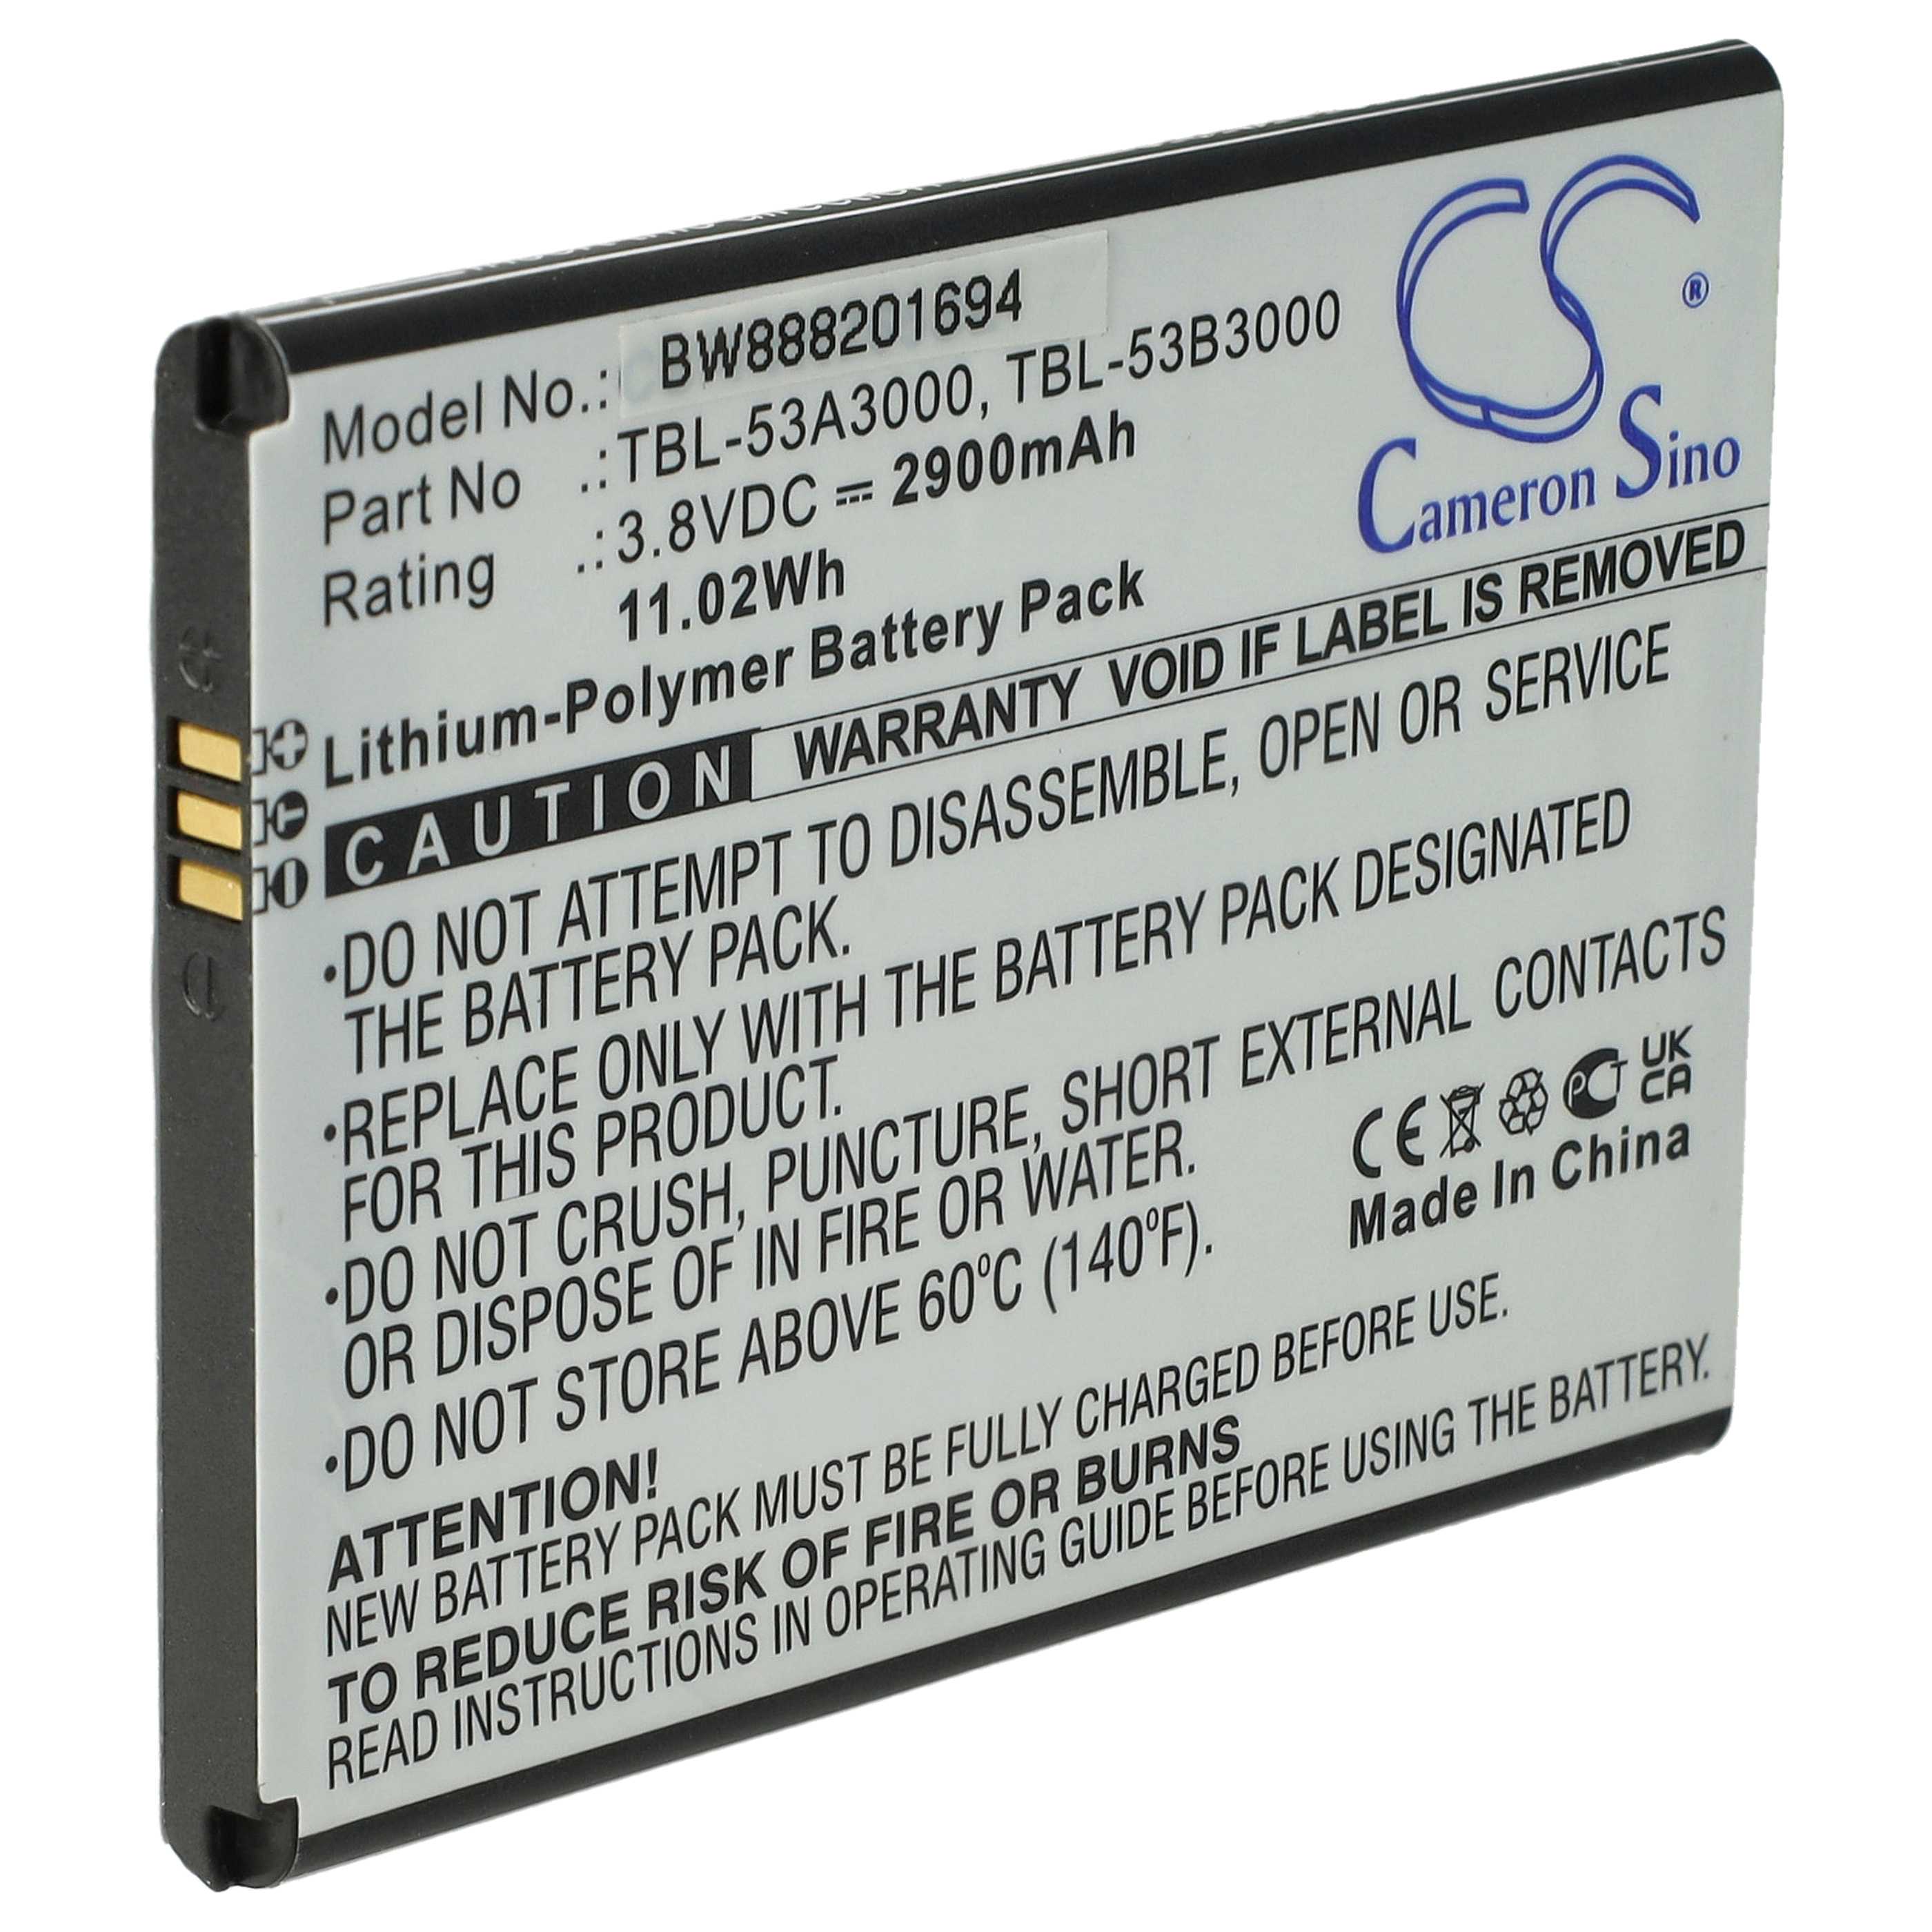 Mobile Router Battery Replacement for TP-Link TBL-53A3000, TBL-53B3000 - 2900mAh 3.8V Li-polymer